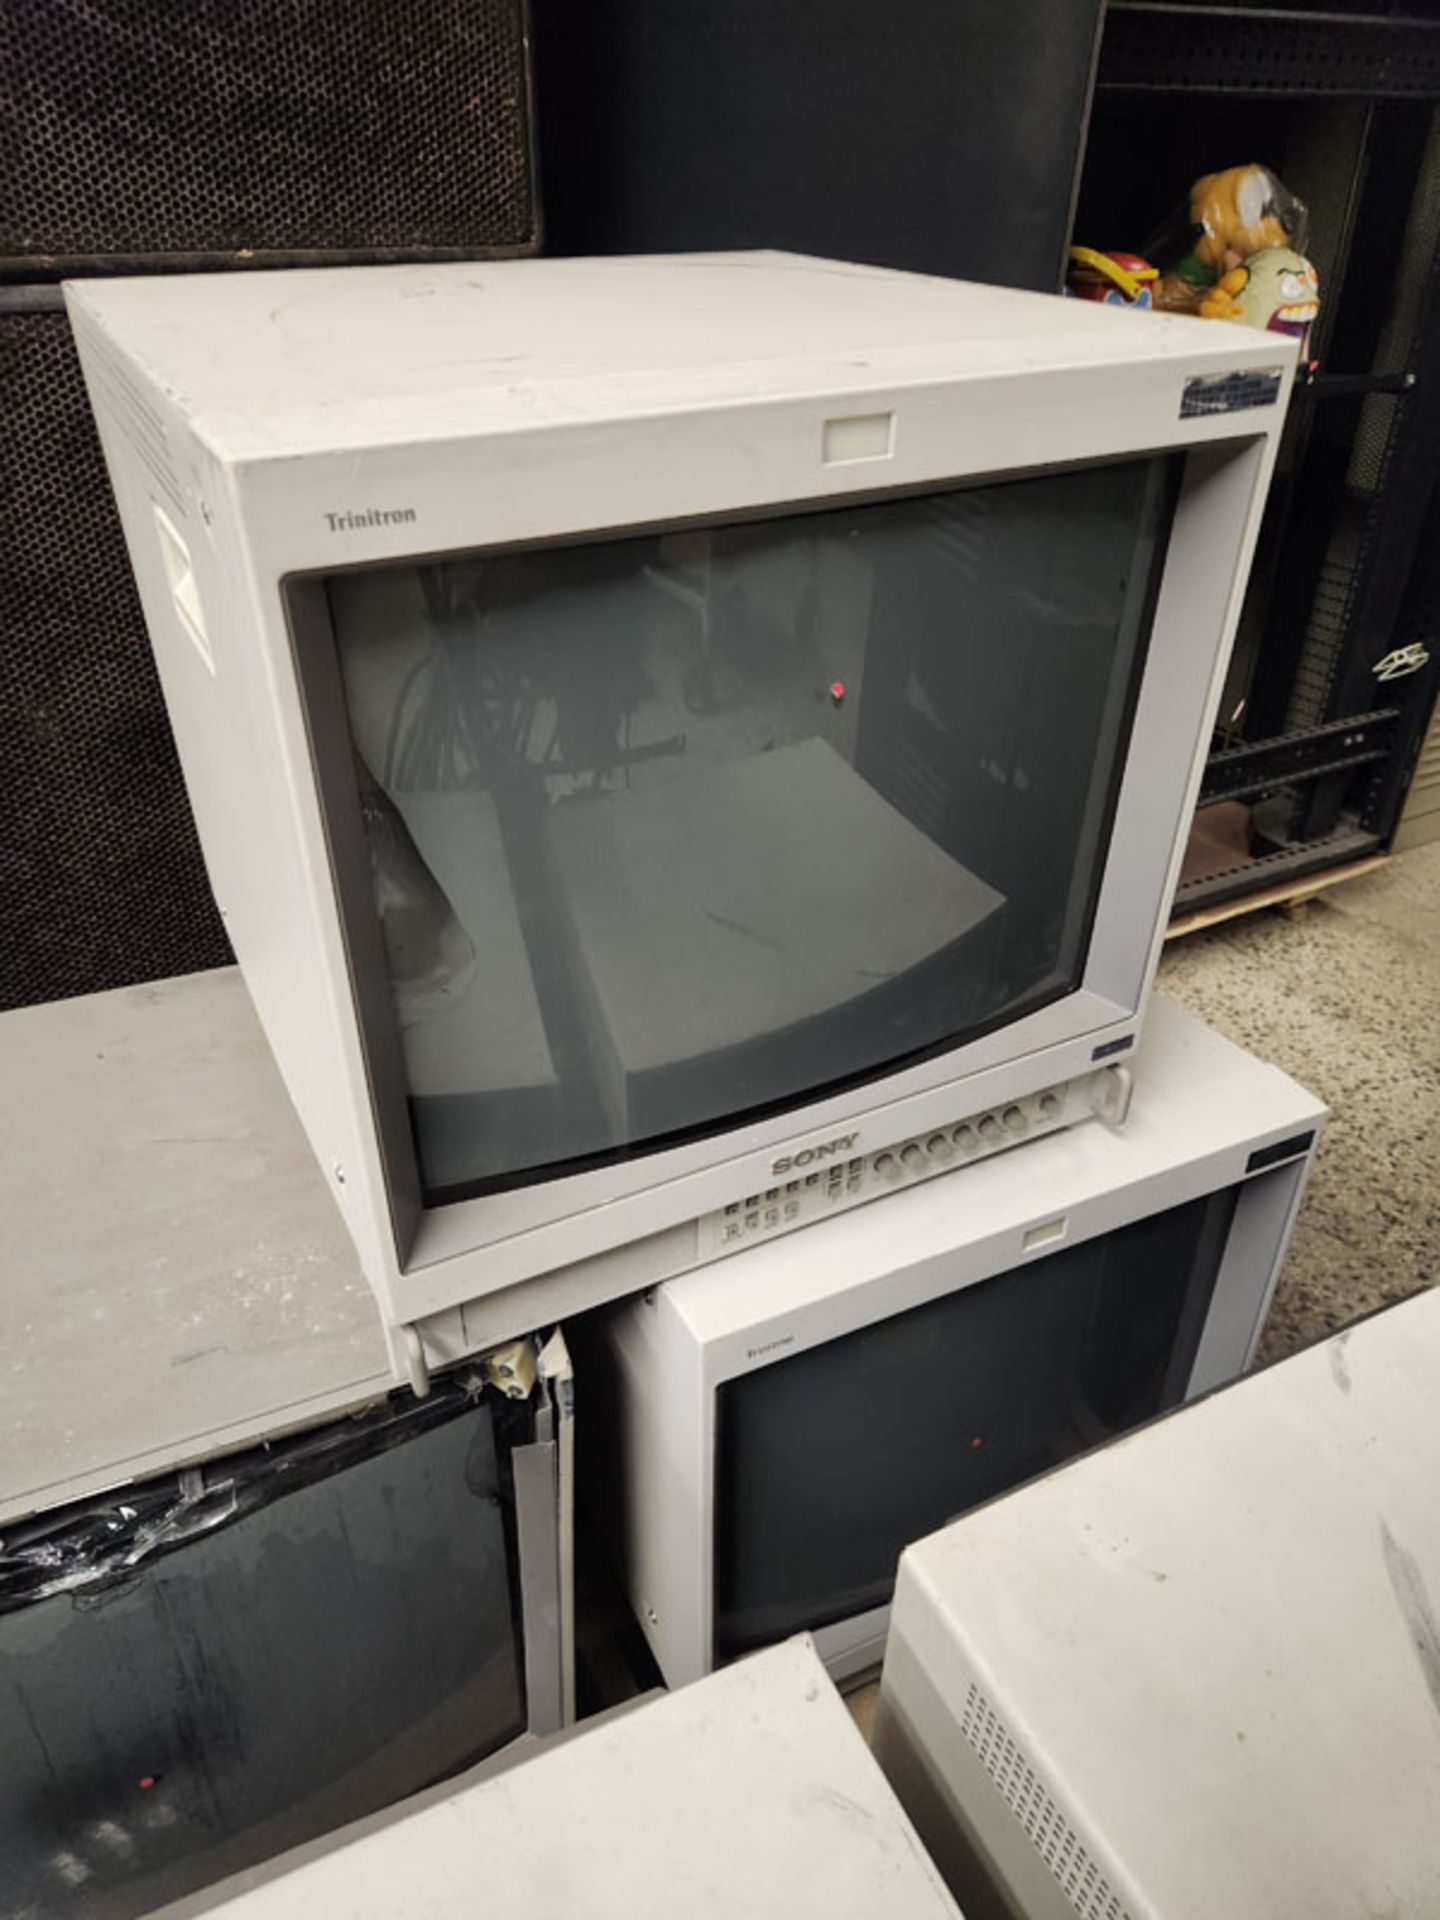 5 SONY TRINITRON CRT COLOR VIDEO MONITORS FOR PARTS - ALL WORKING BEFORE TABLE COLLAPSED AND THEY AL - Image 3 of 10